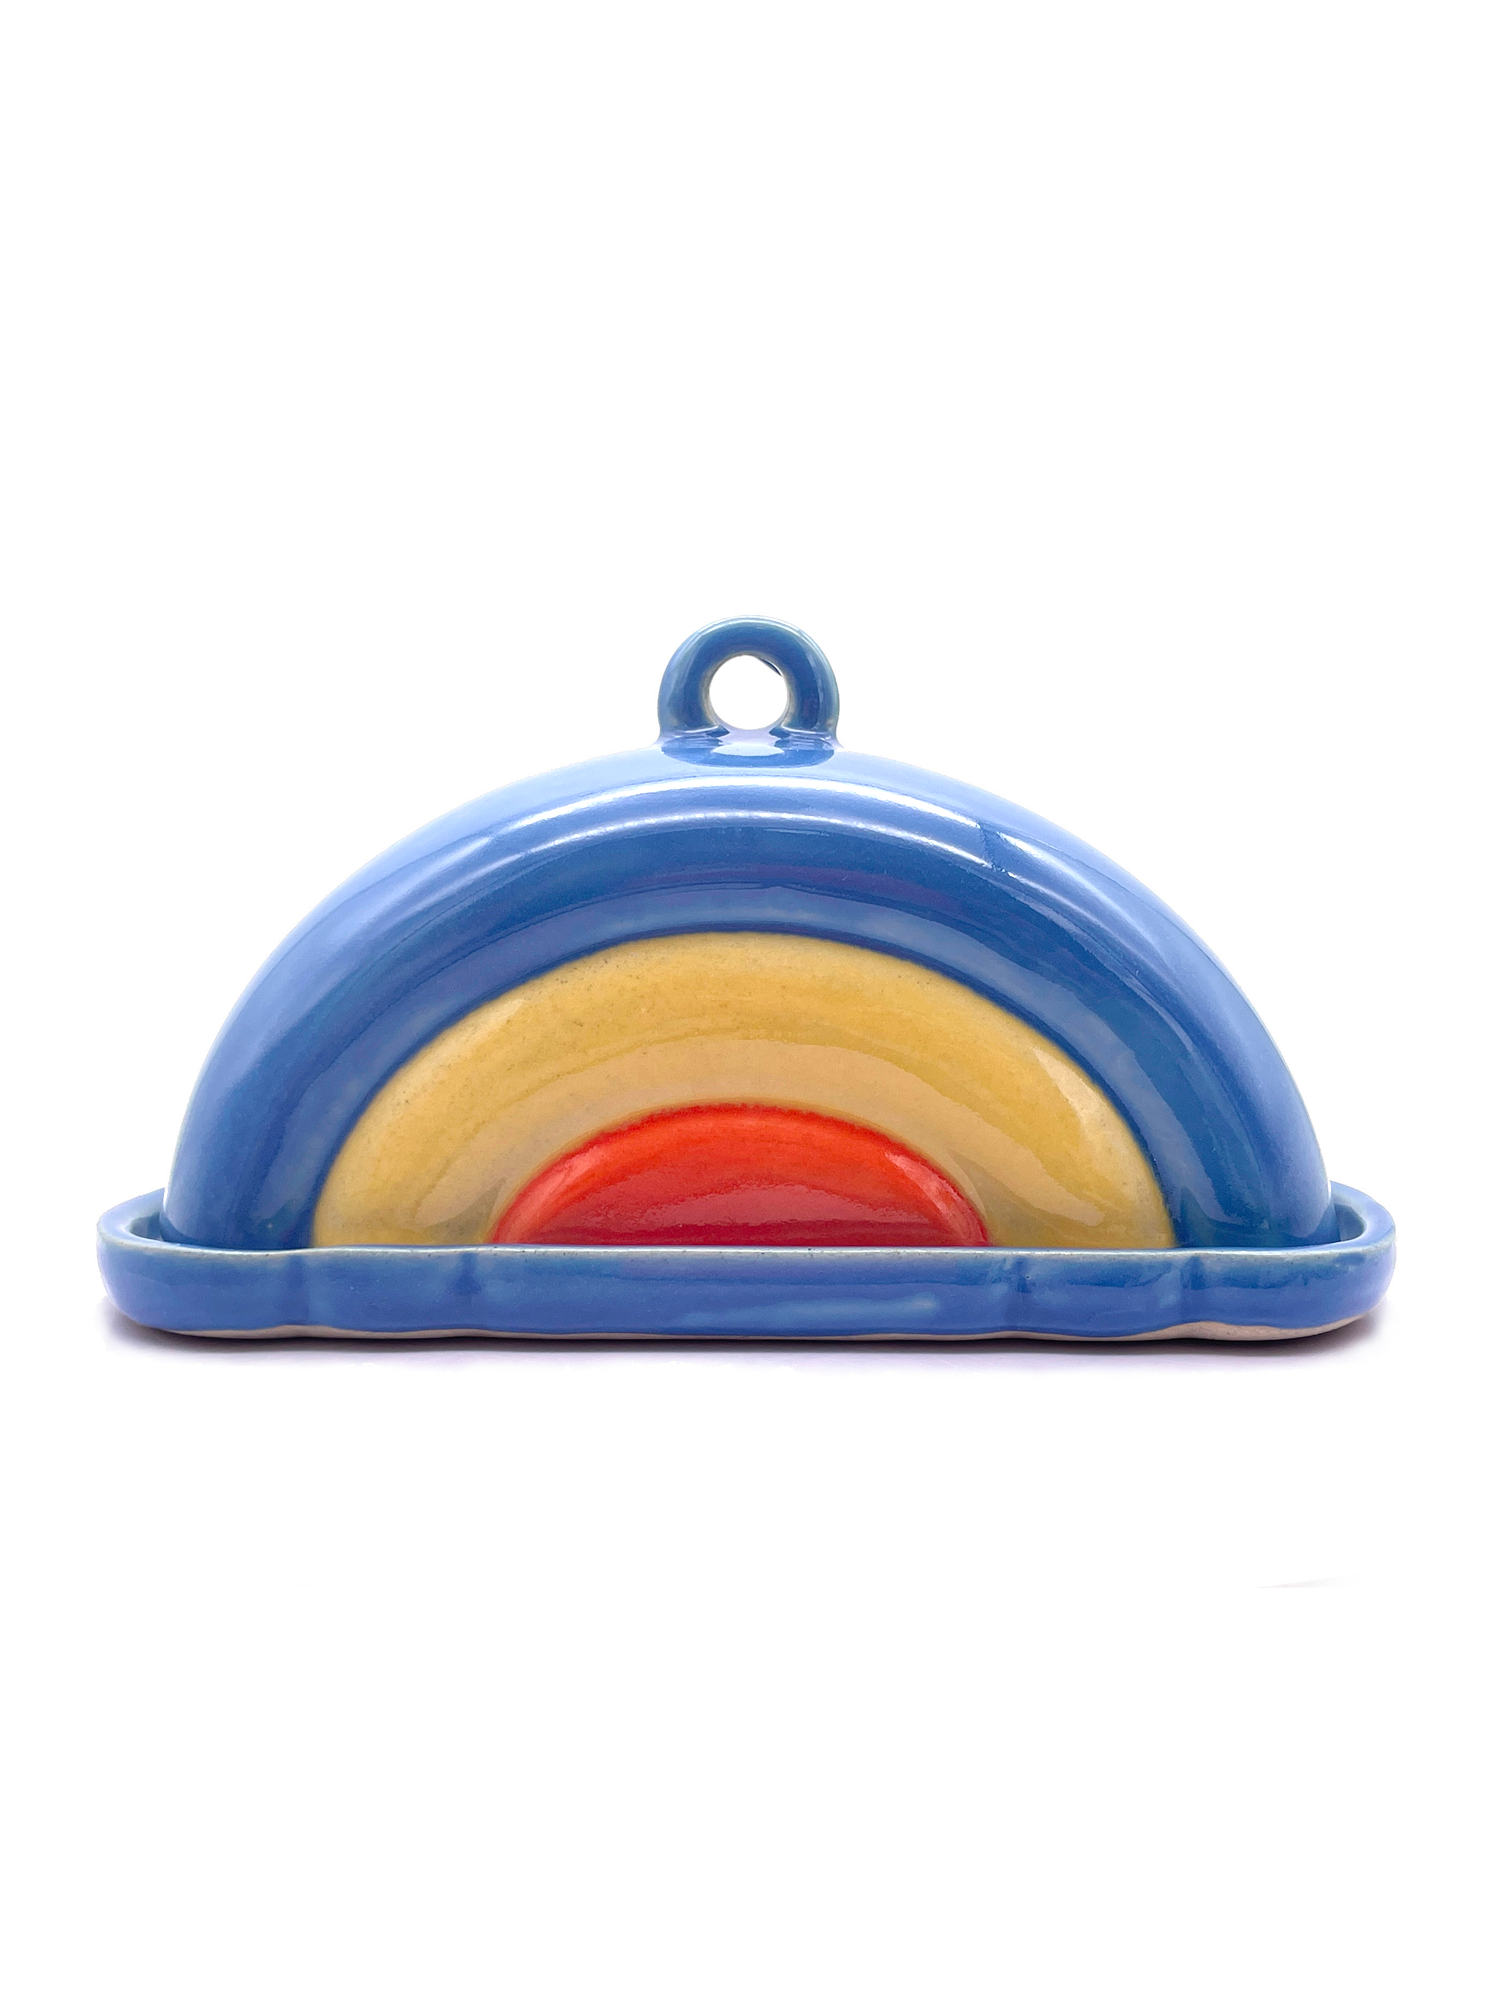 Standard Butter Dish(Colors May Vary)